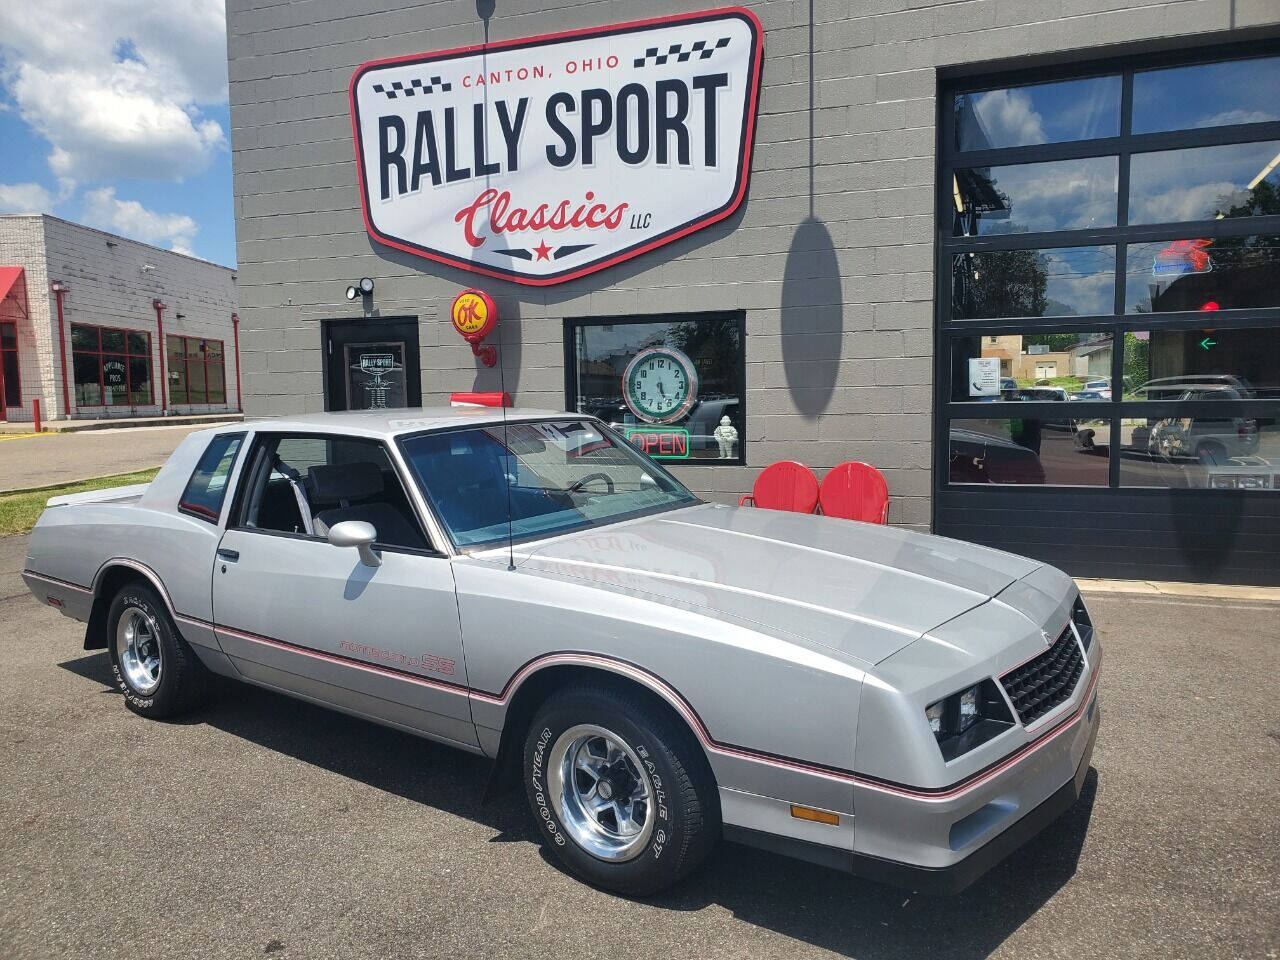 used 1985 chevrolet monte carlo for sale carsforsale com used 1985 chevrolet monte carlo for